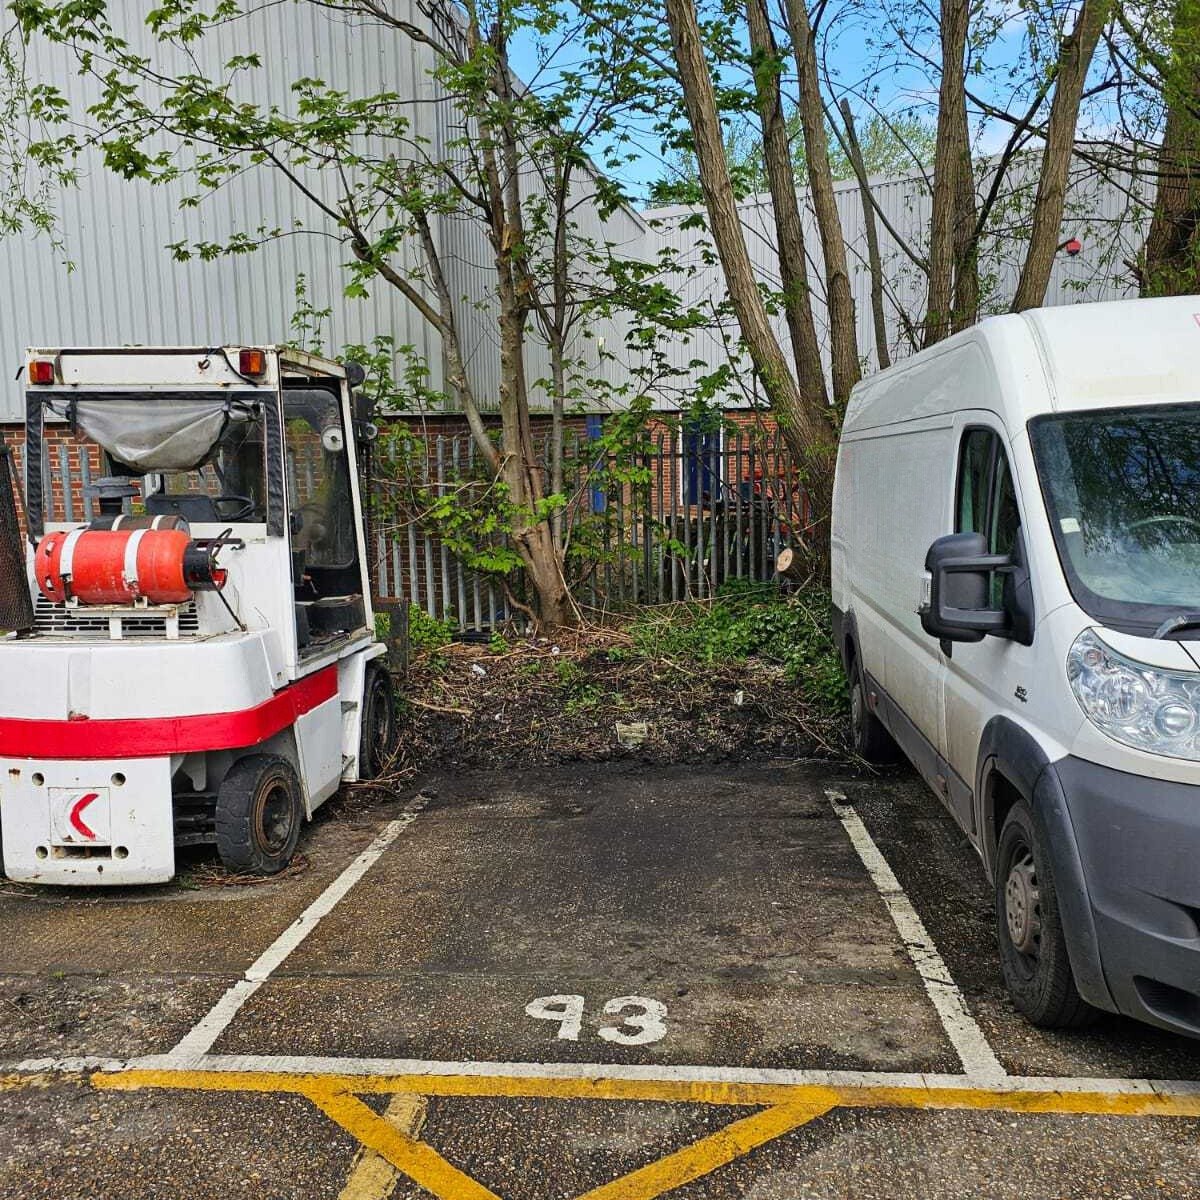 You see, a little bit of sunshine can take all your problems away.

The right personnel helps too 😉

For your Nationwide Security & Facilities Management
Call 02071014800
enquiries@bmlgroup.co.uk

#TreeRemoval #FacilitiesManagement #BMLGroup #SecurityServices #ProblemSolvers